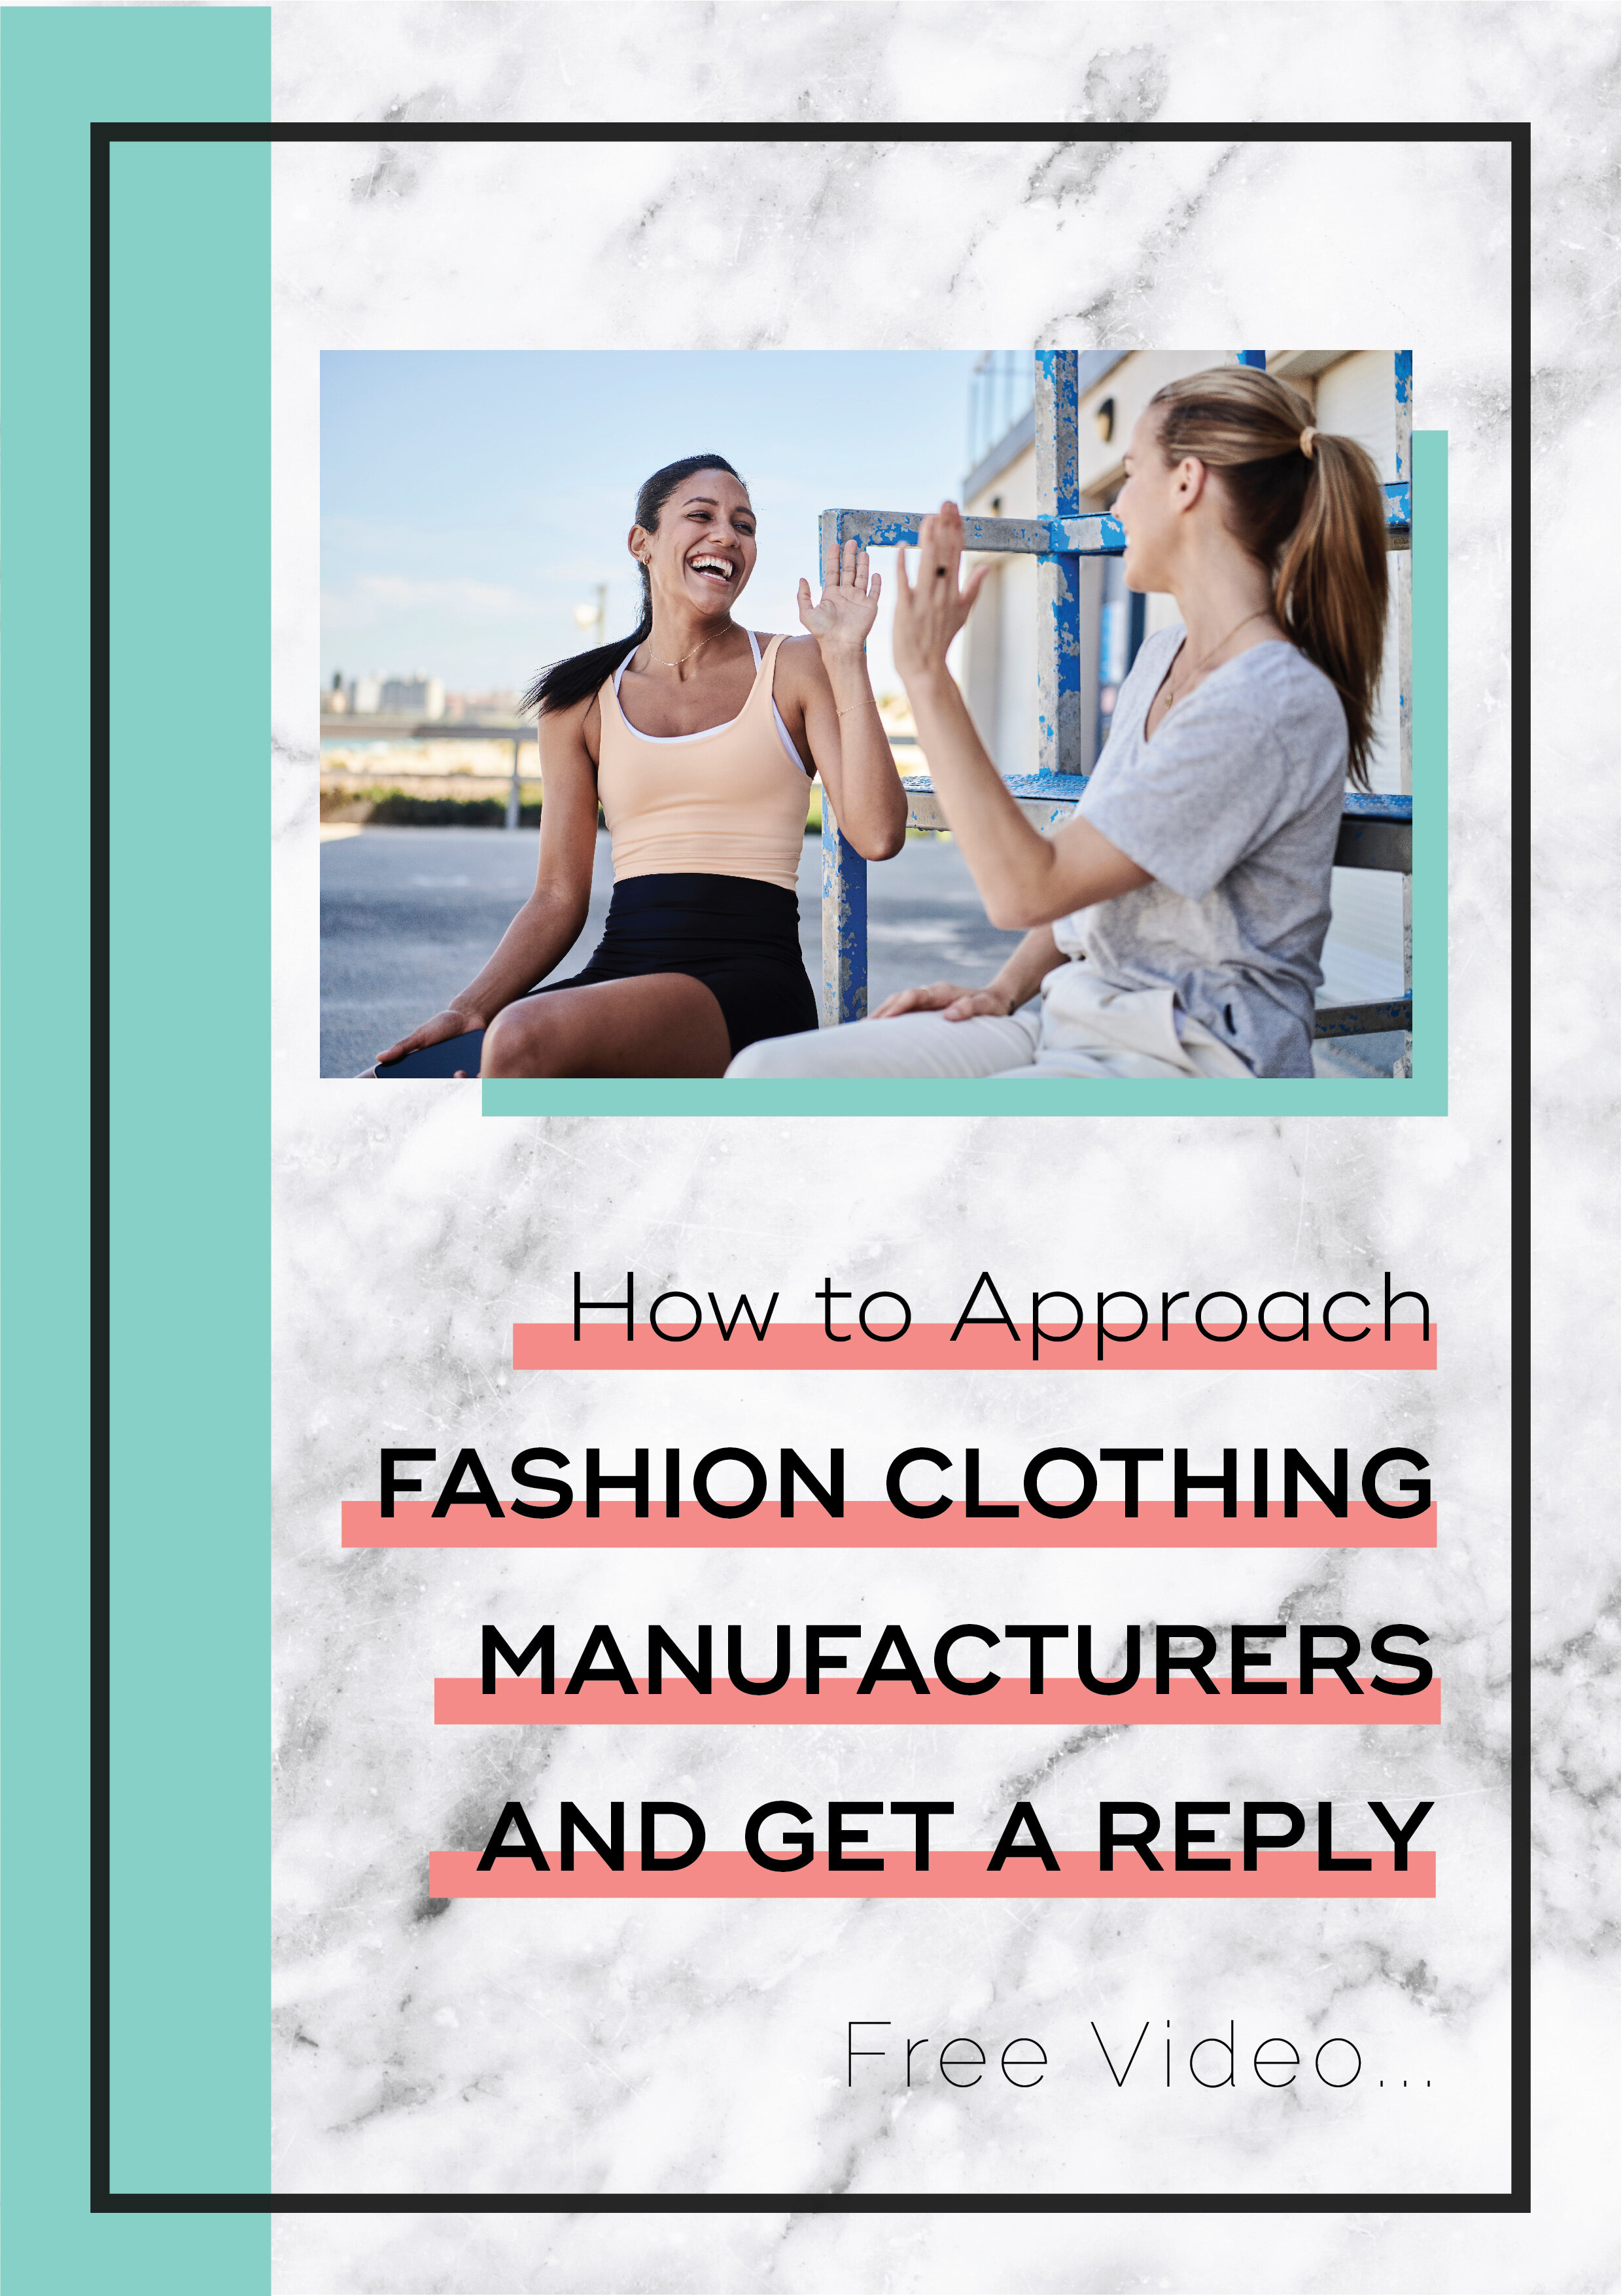 How to Approach Fashion Clothing Manufacturers and Get a Reply Video.jpg